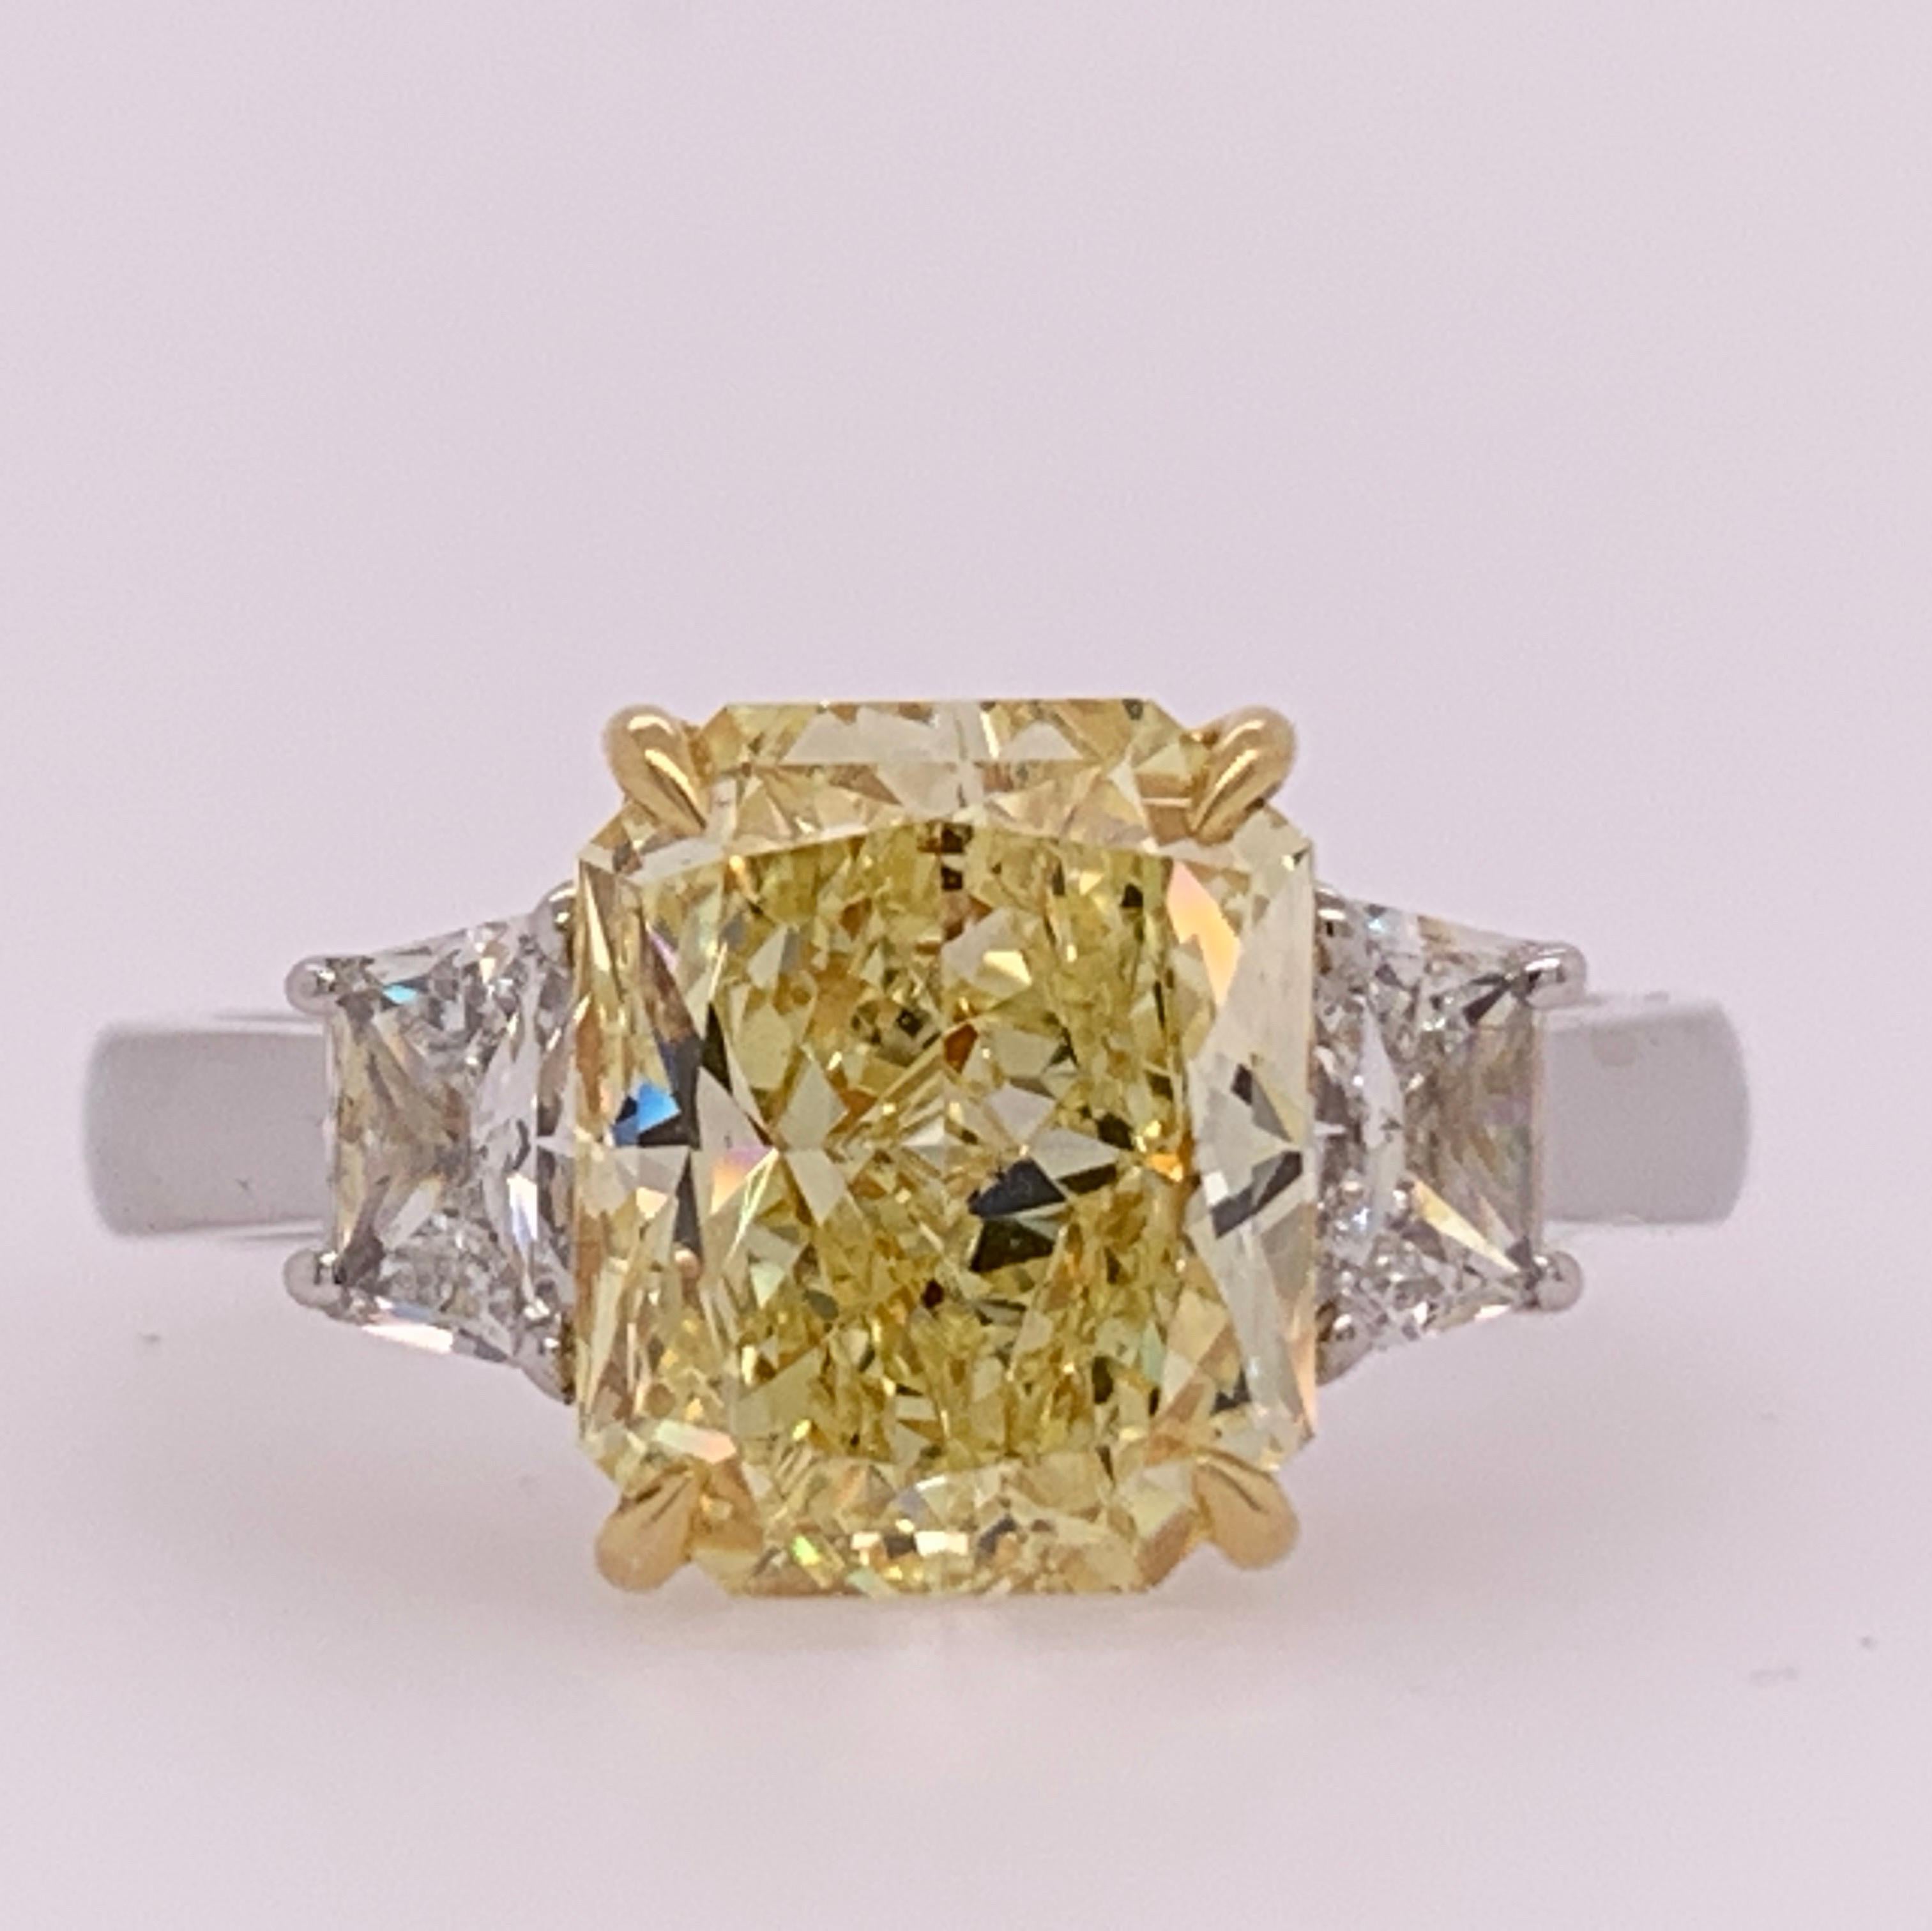 A stunning GIA certified Fancy Yellow radiant cut that looks like a much larger stone for its weight (size 6.25). The color saturation is very strong, a borderline intense.....

The inclusions (si1) are pleasant and the sidestones are colorless (F